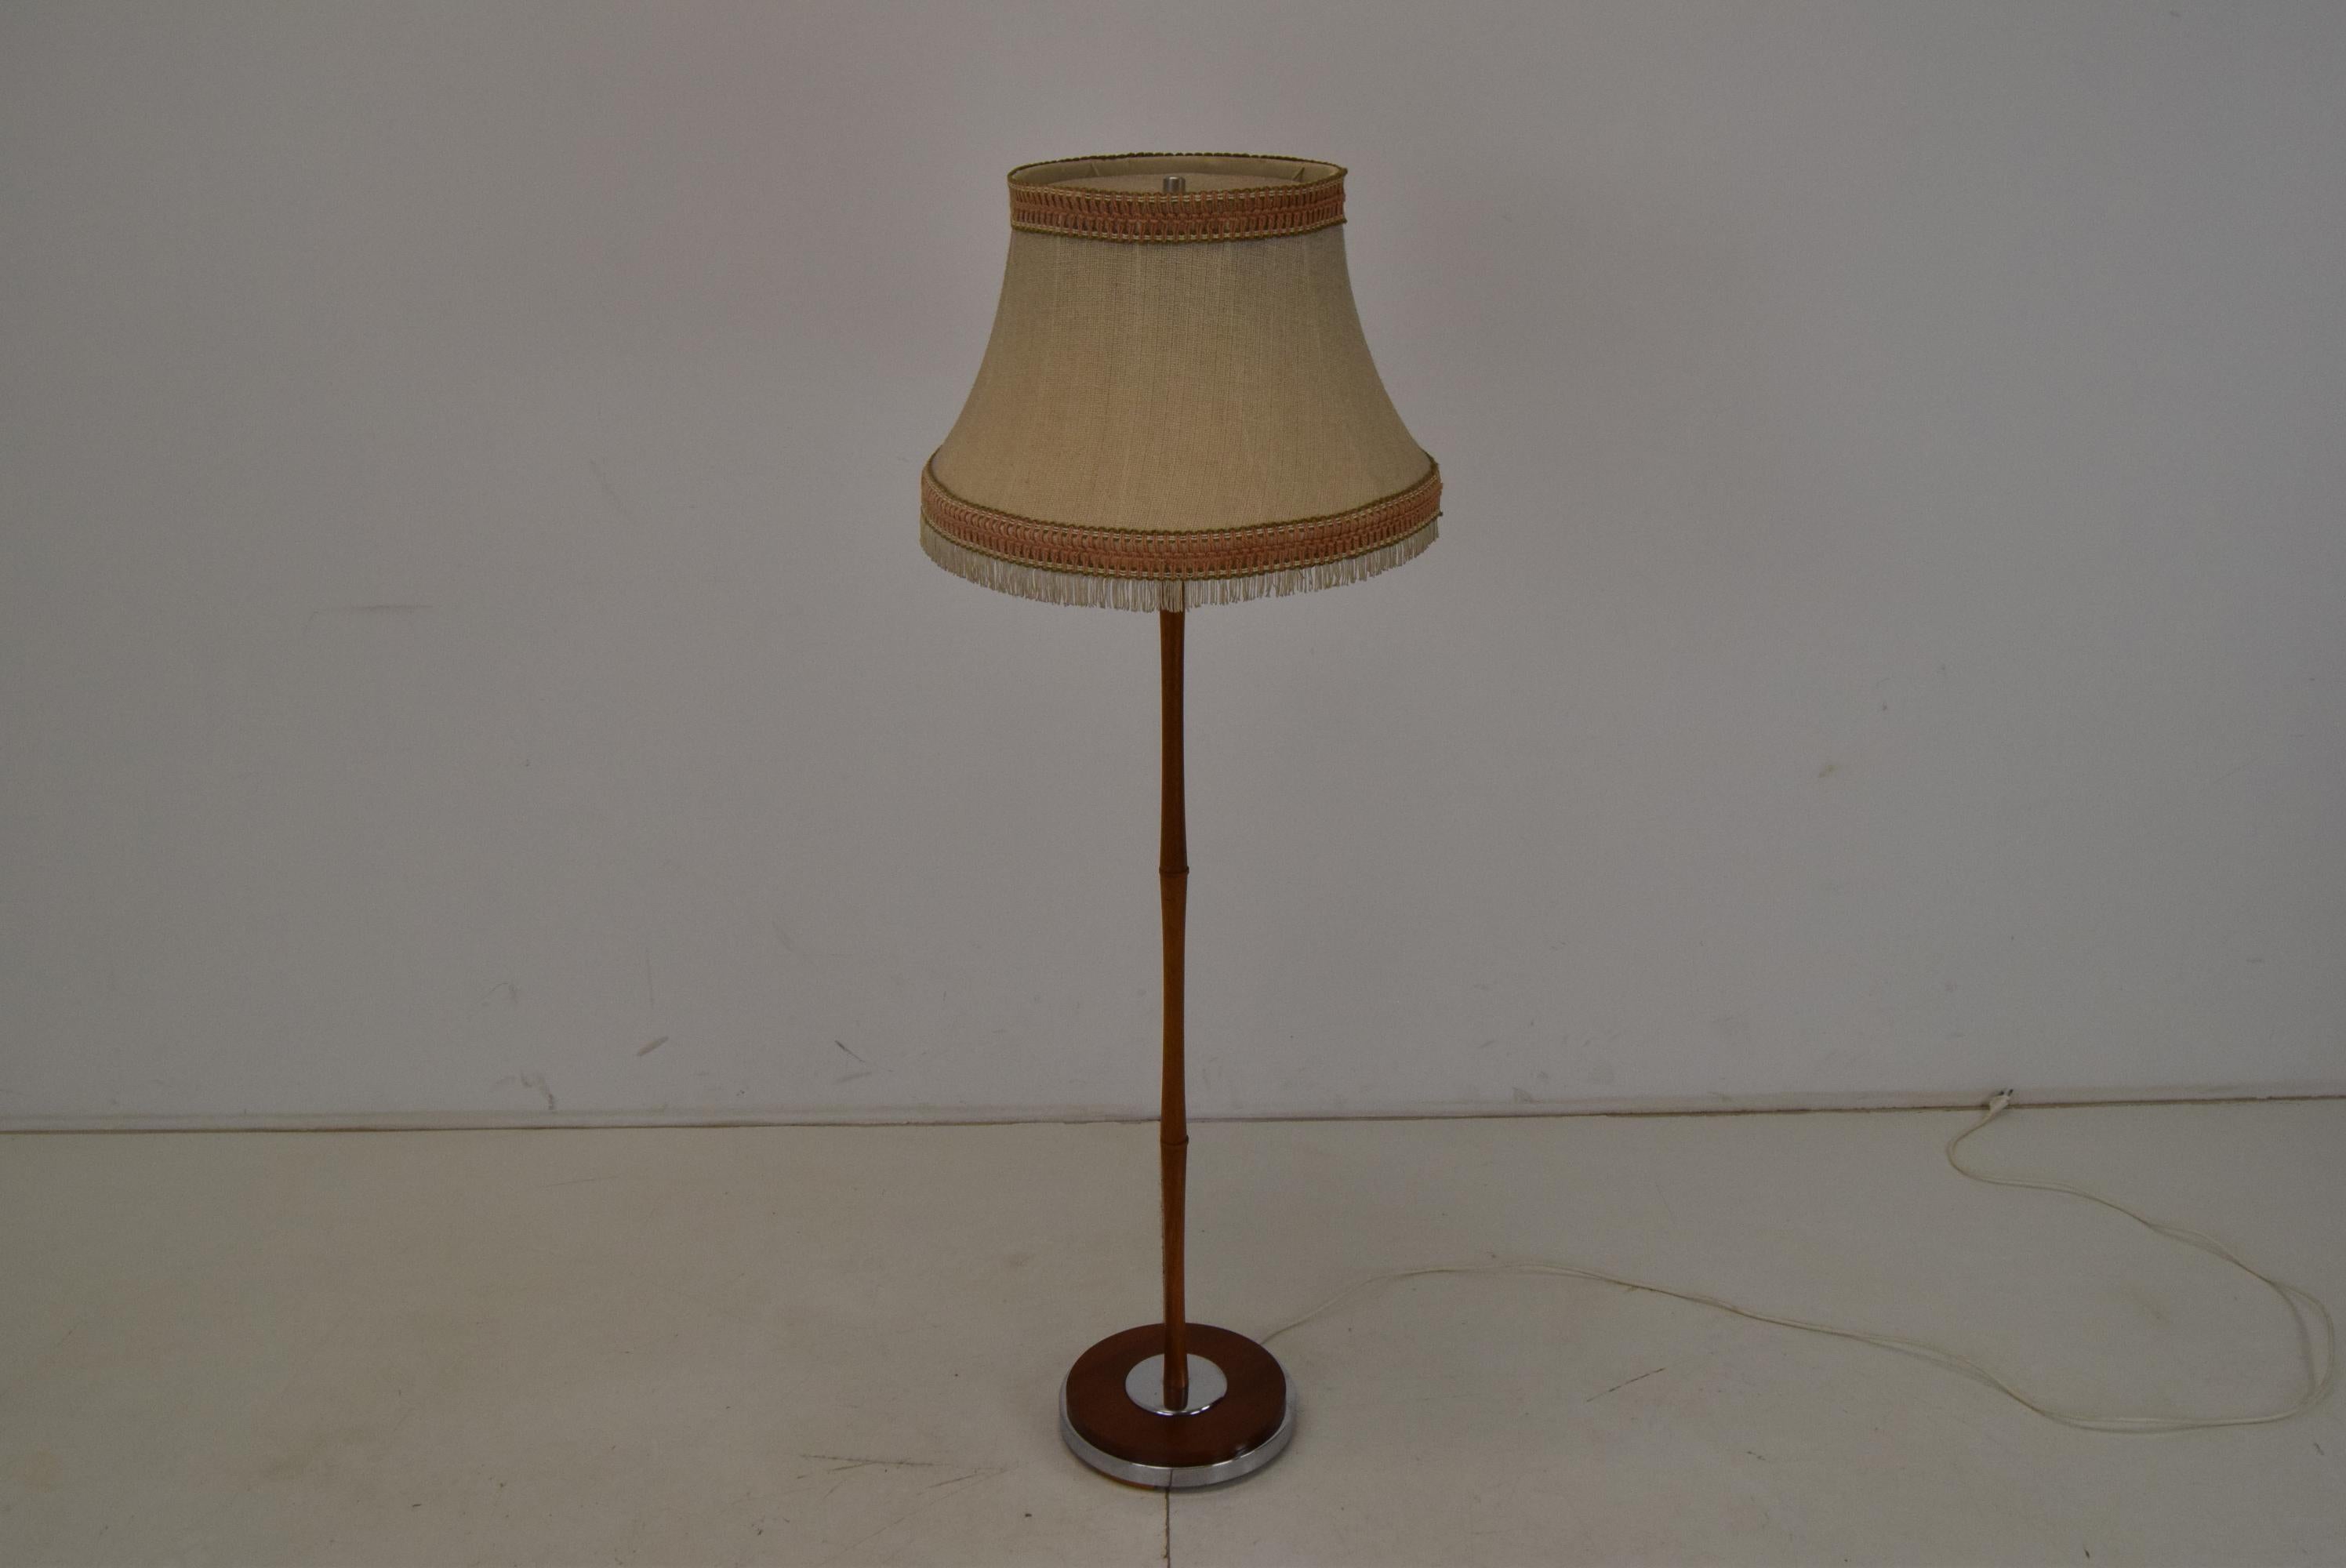 Made in Germany 
Made of fabric, wood, chrome
2xE27 or E26 bulb
US adapter included
Original condition.

    